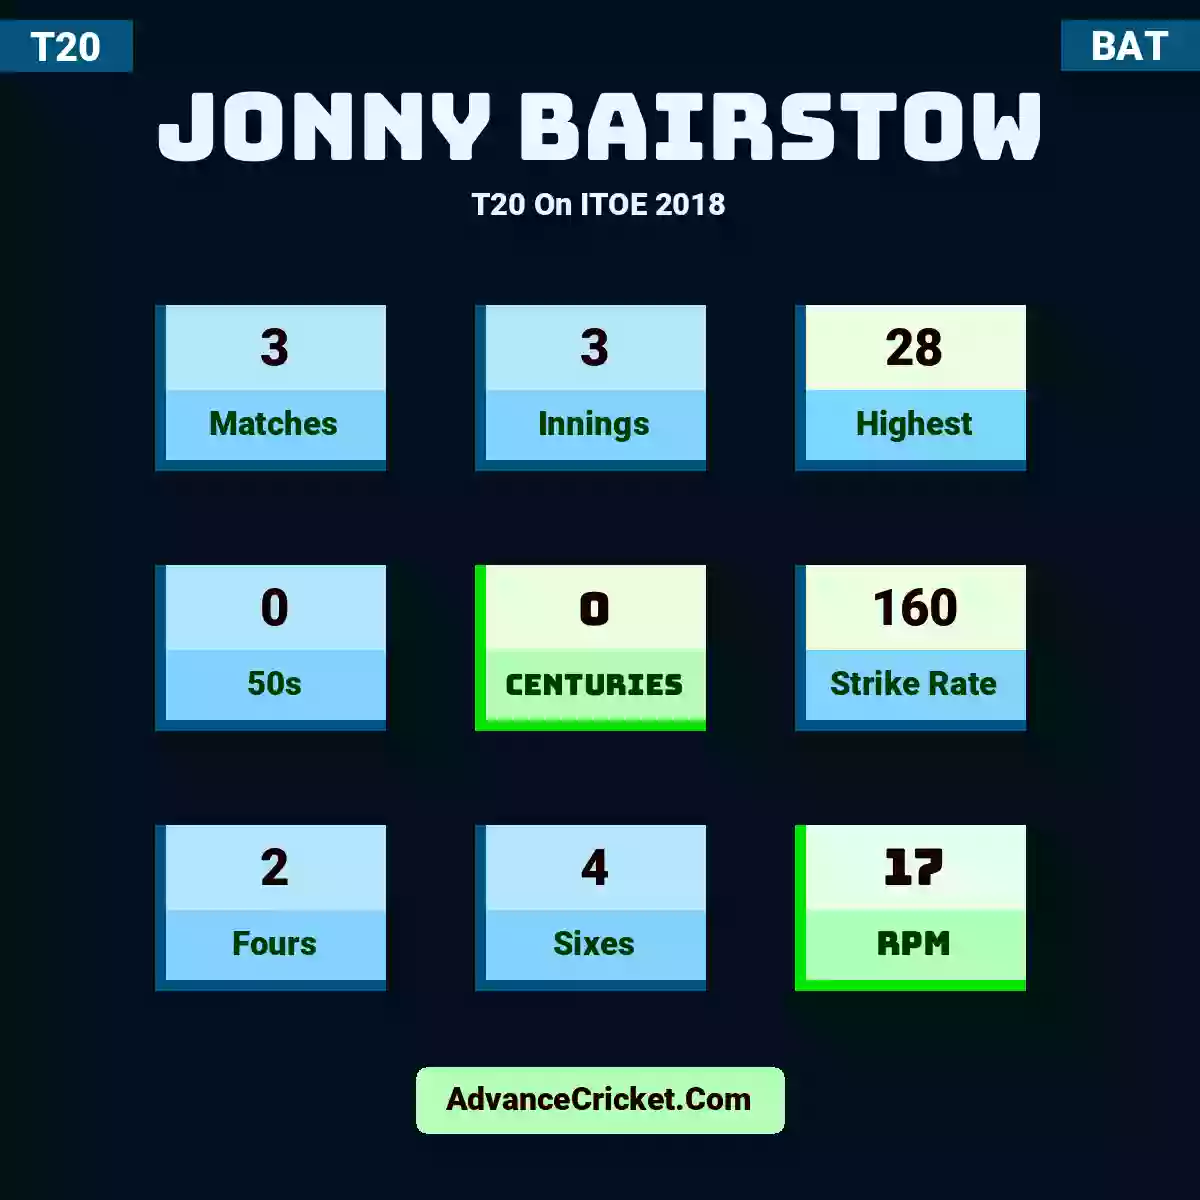 Jonny Bairstow T20  On ITOE 2018, Jonny Bairstow played 3 matches, scored 28 runs as highest, 0 half-centuries, and 0 centuries, with a strike rate of 160. J.Bairstow hit 2 fours and 4 sixes, with an RPM of 17.